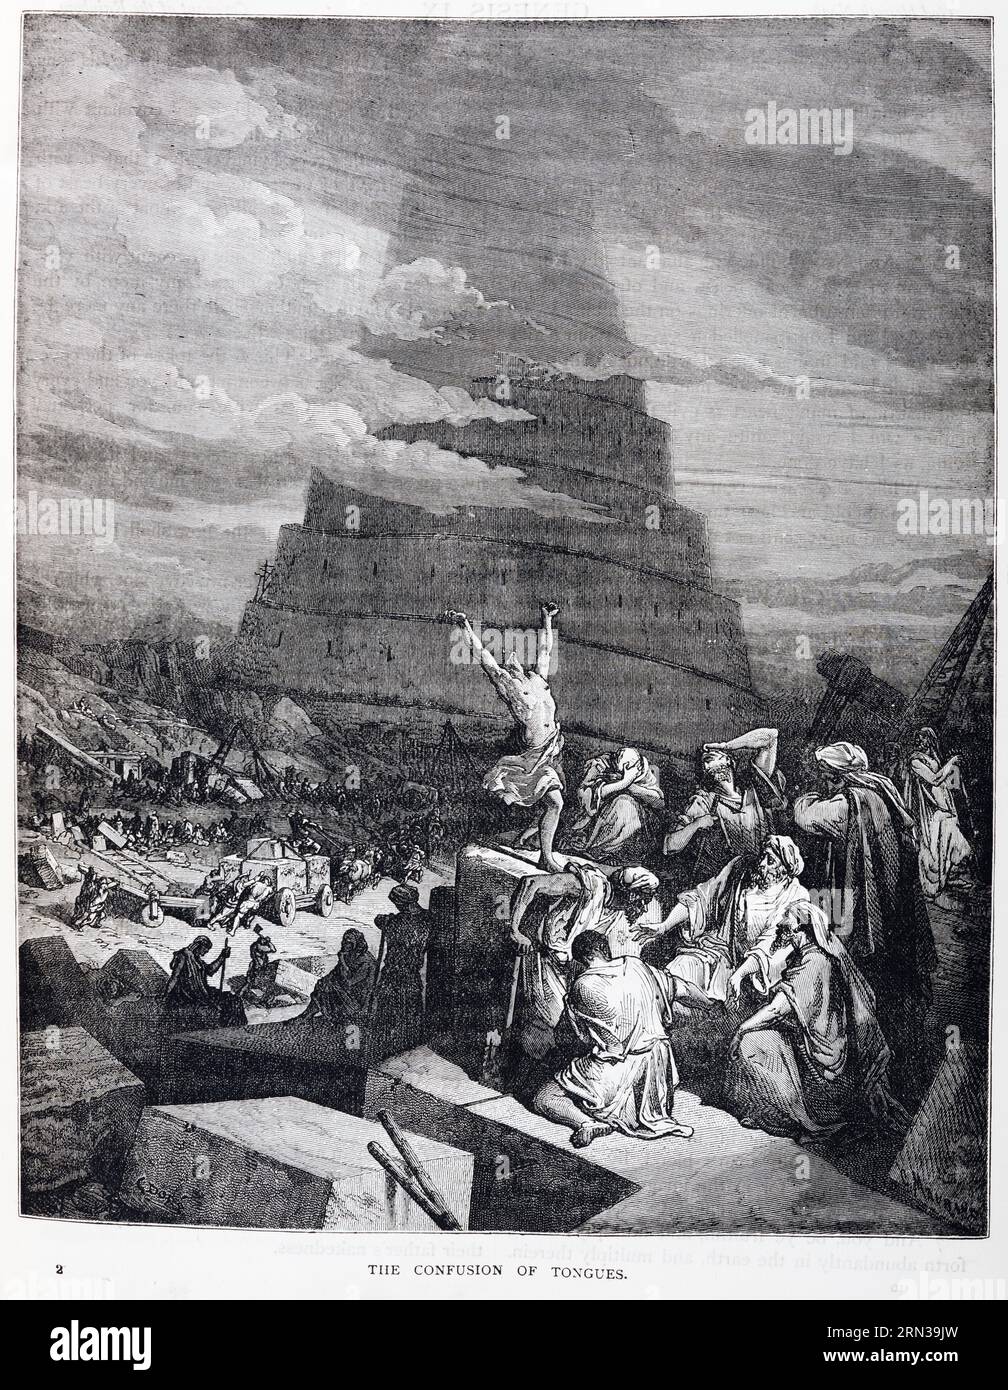 The Confusion of Tongues or The Tower of Babel, a wood engraving by Gustave Doré, from his 1866 illustrated version of the King James Bible, first published in France as La Grande Bible de Tours Stock Photo